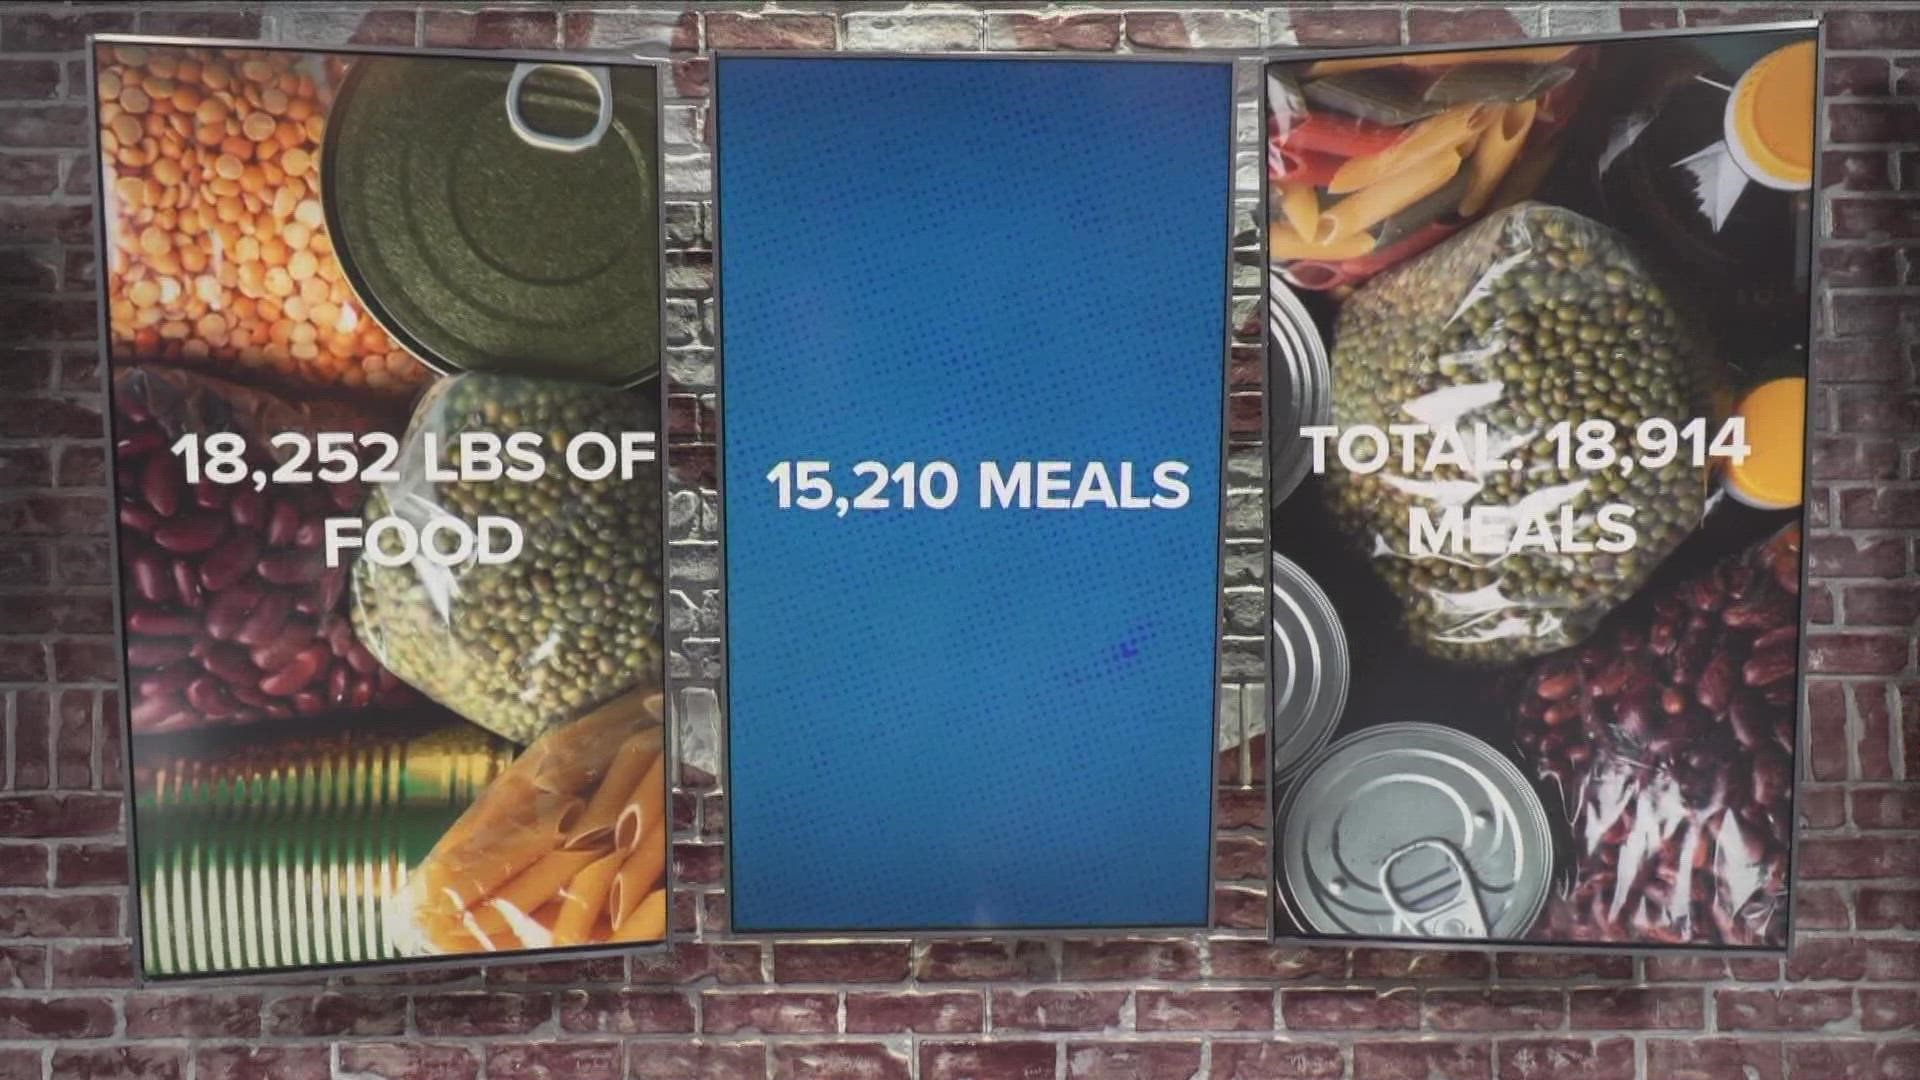 Between food and cash donations, the community helped provide nearly 19,000 meals to those in need.